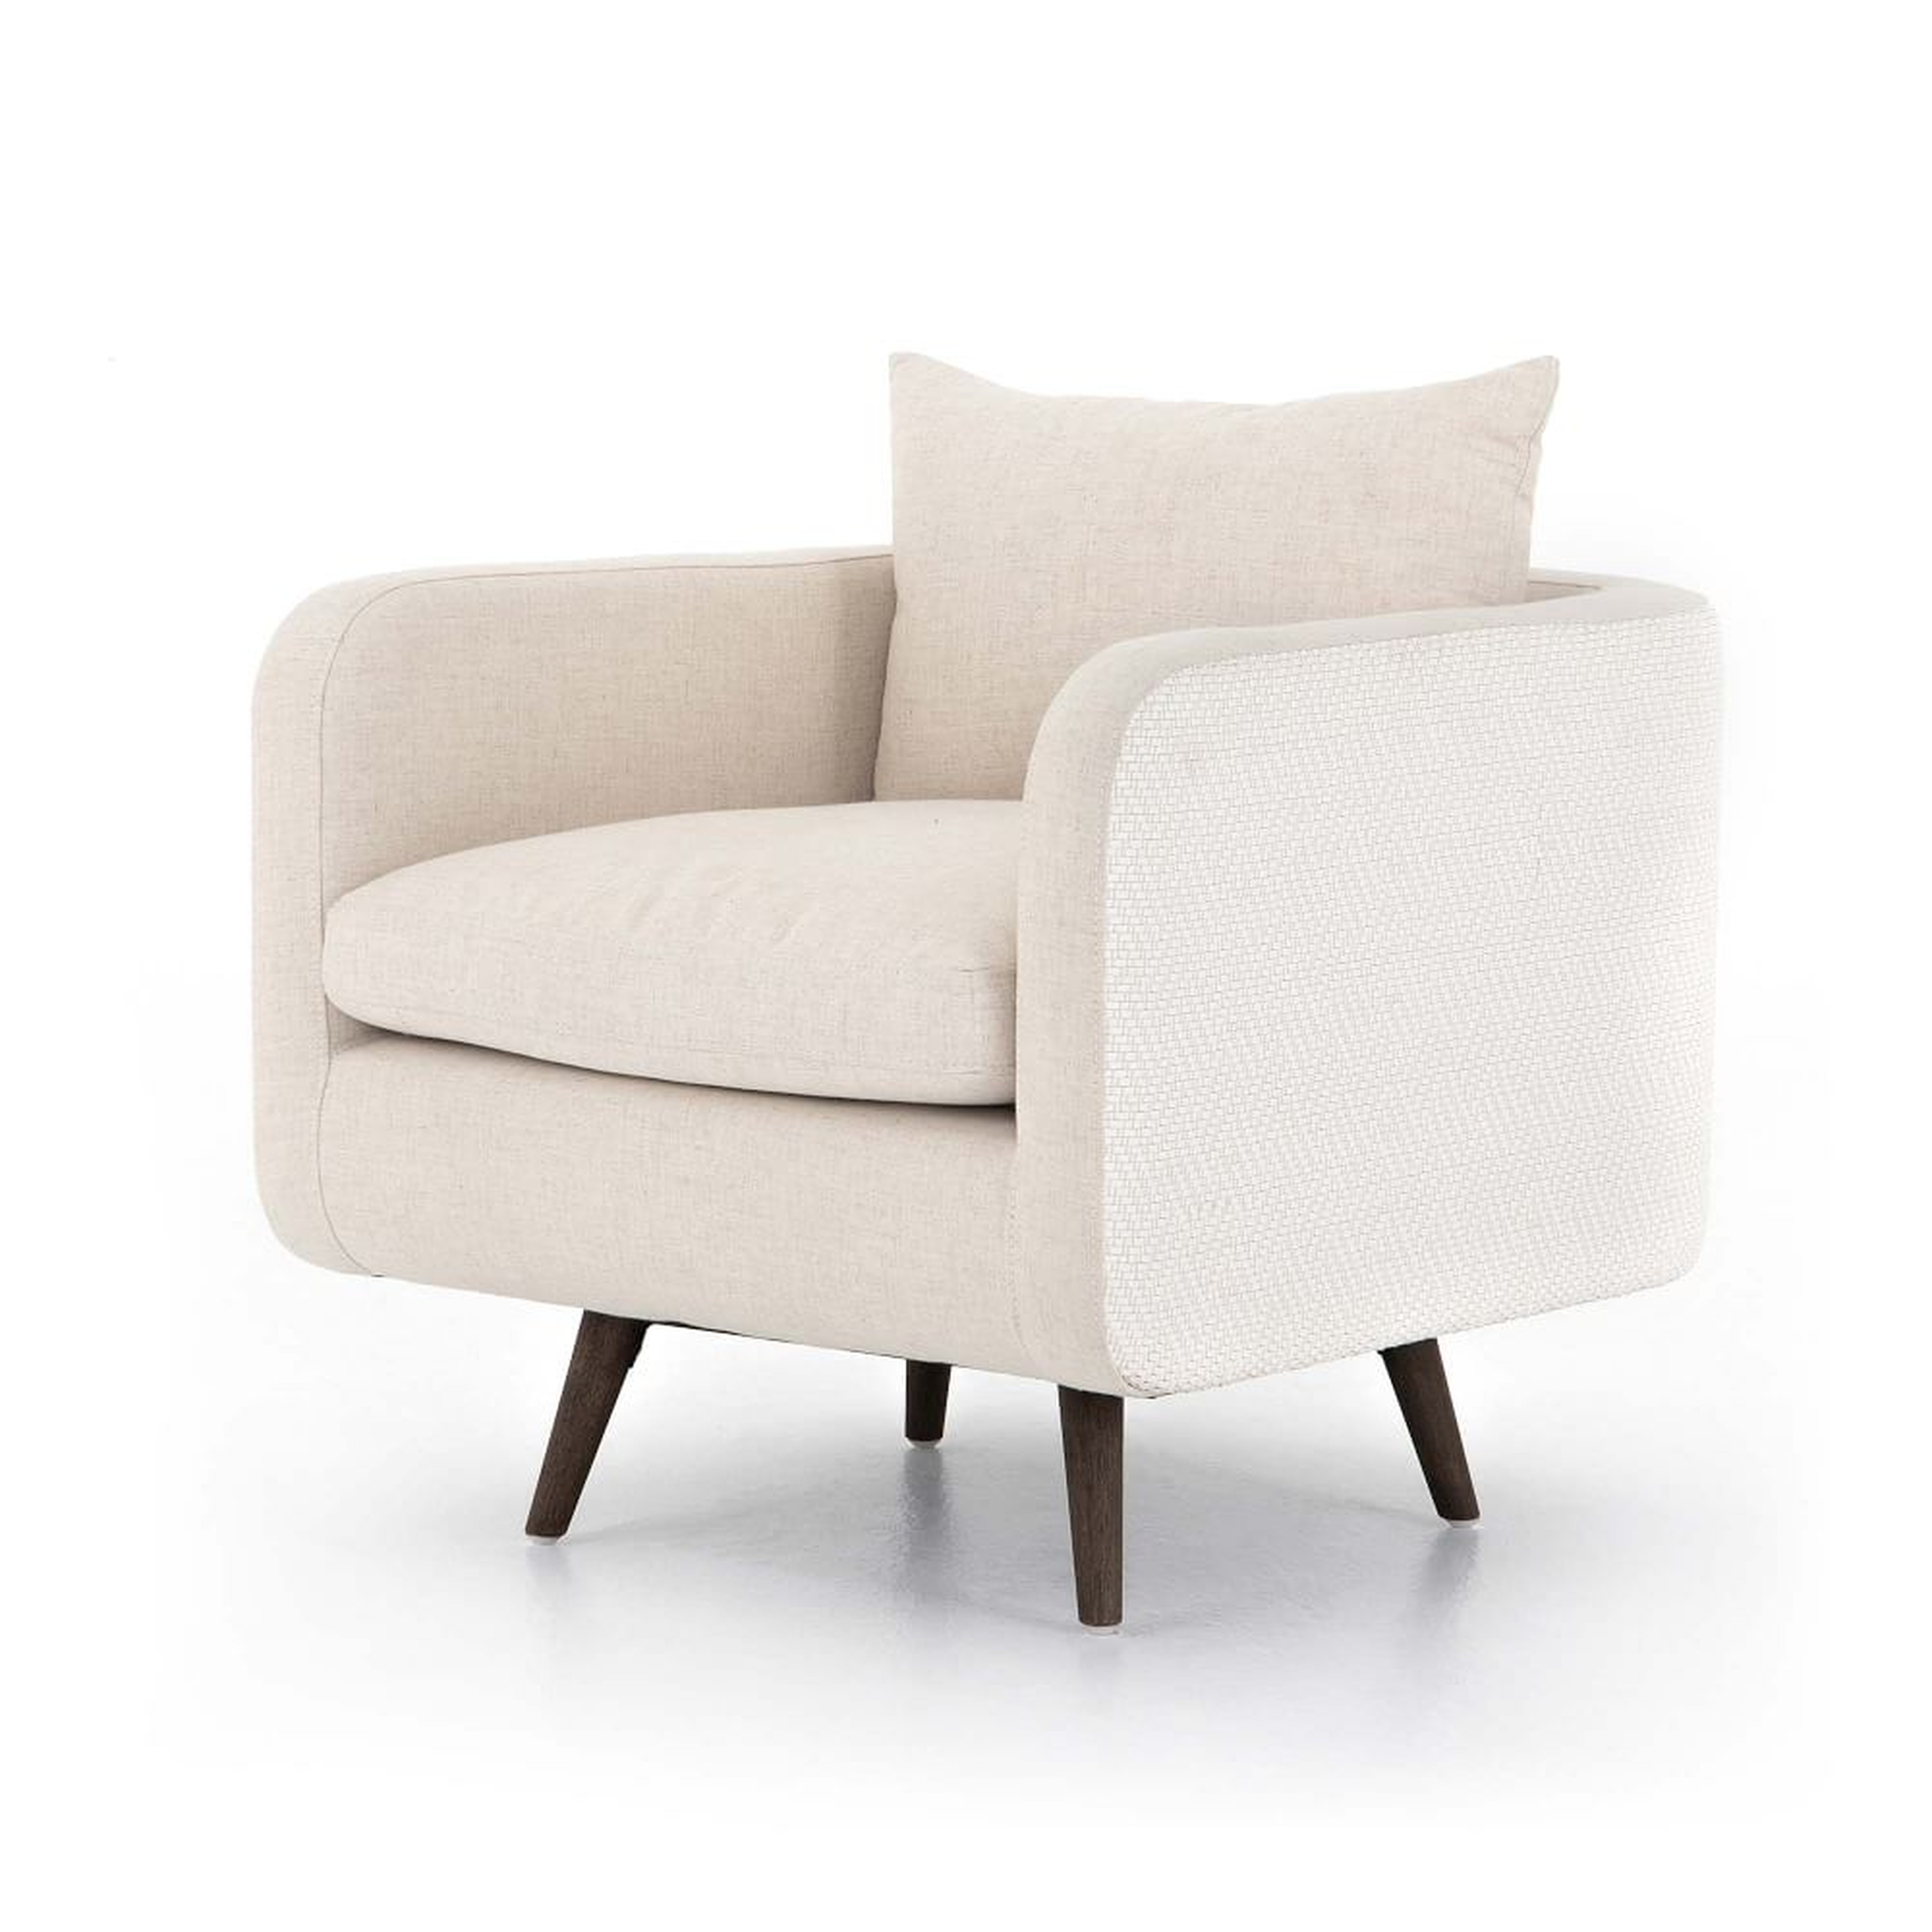 Rounded Back Swivel Chair, Clover Beige - West Elm